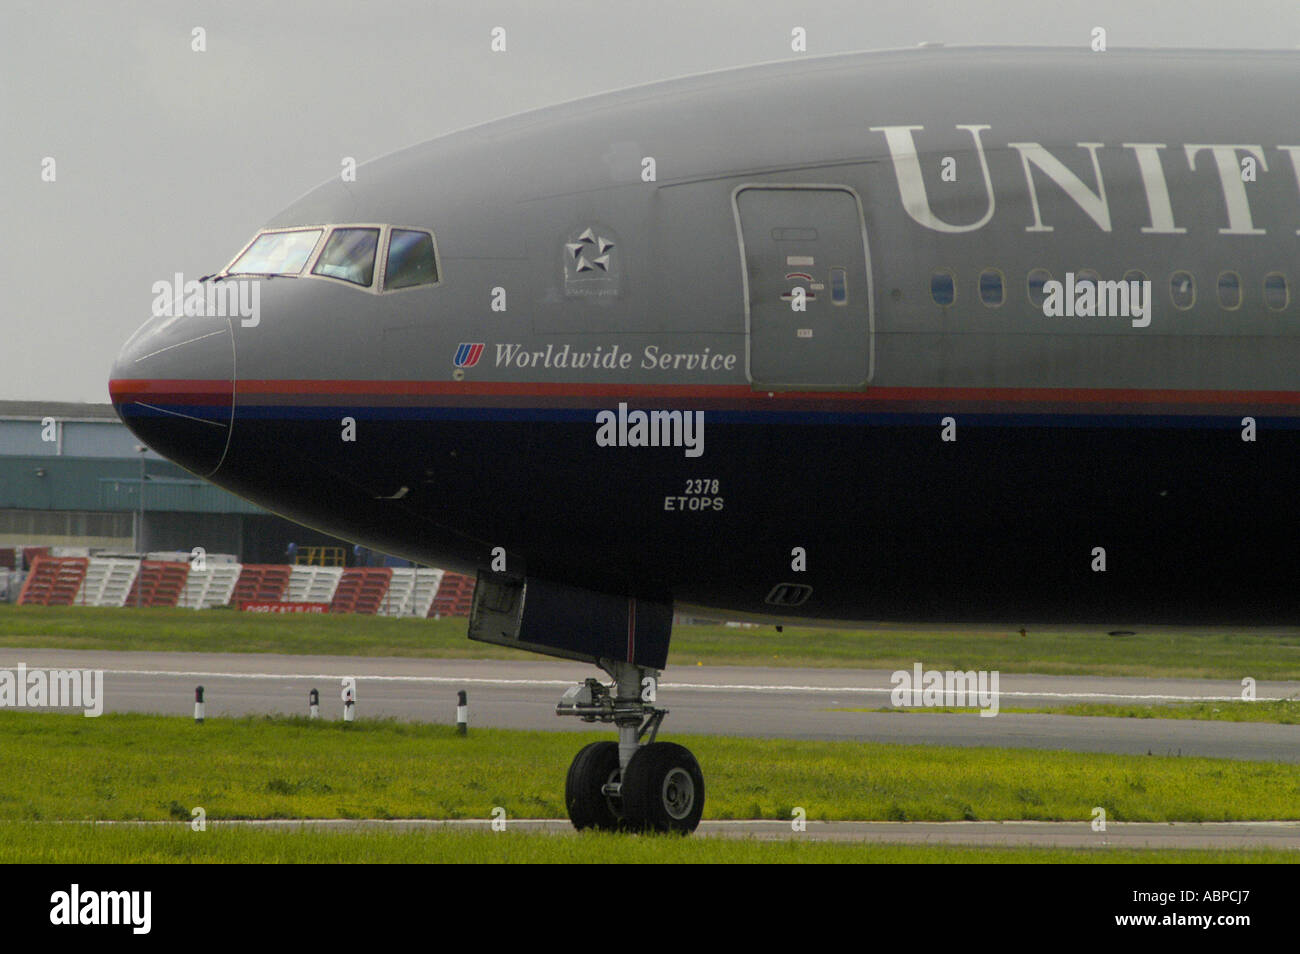 United Airlines airliner taxiing at Heathrow Airport London. Picture by Andrew Hasson May 18th 2006 Stock Photo